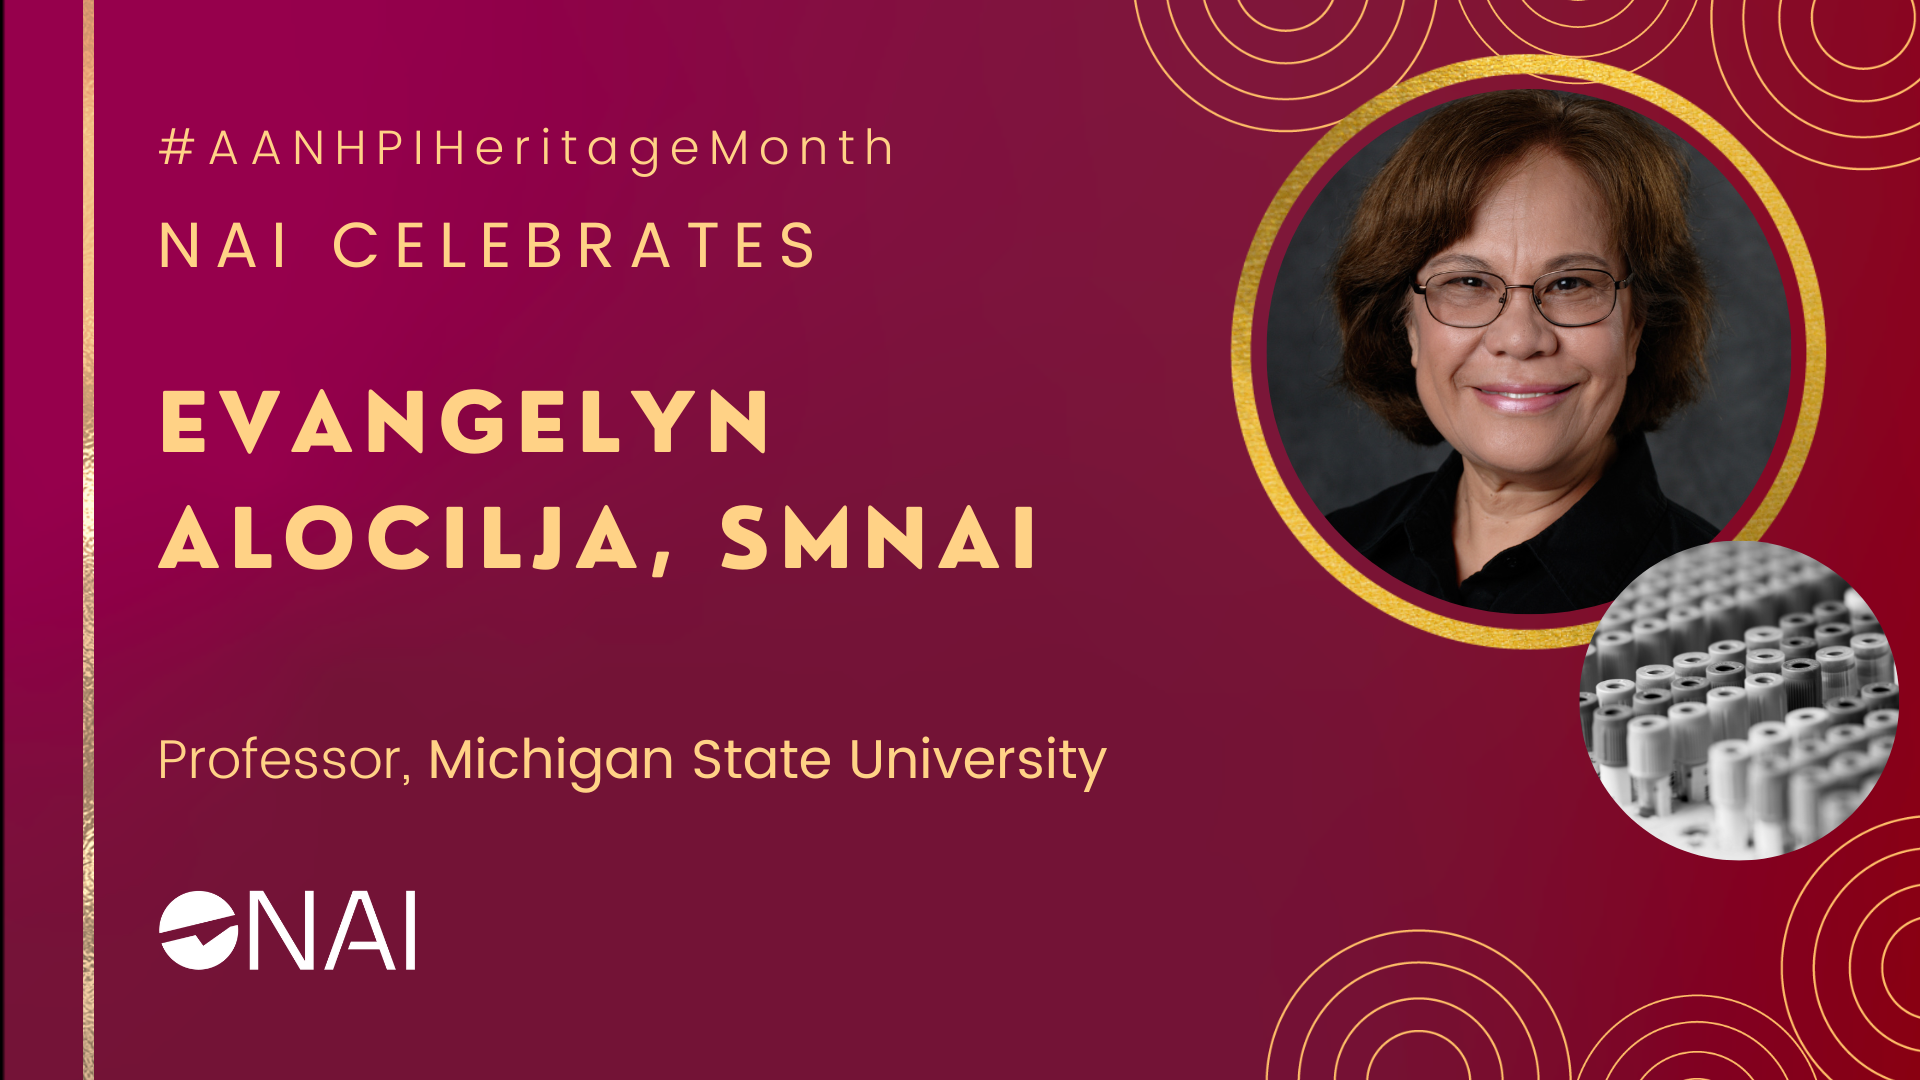 A graphic shows headshot of Evangelyn Alocilja, SMNAI, with the text “#AANHPIHeritage Month NAI celebrates Evangelyn Alocilja” followed by “Professor, Michigan State University”.